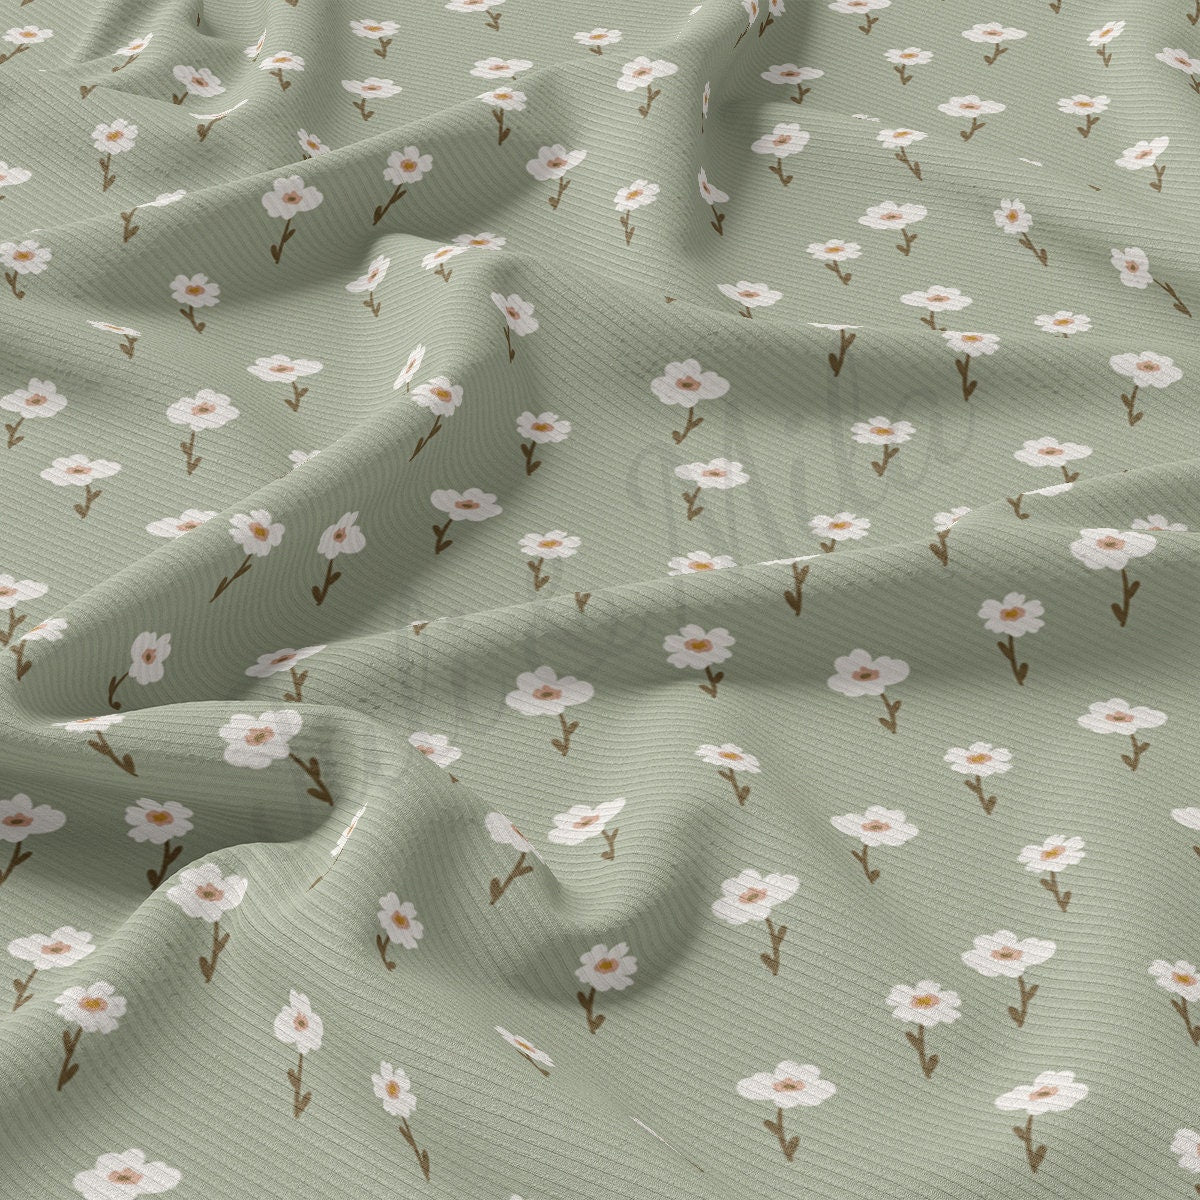 Floral Rib Knit Fabric by the Yard Ribbed Jersey Stretchy Soft Polyester Stretch Fabric 1 Yard  RBK2183